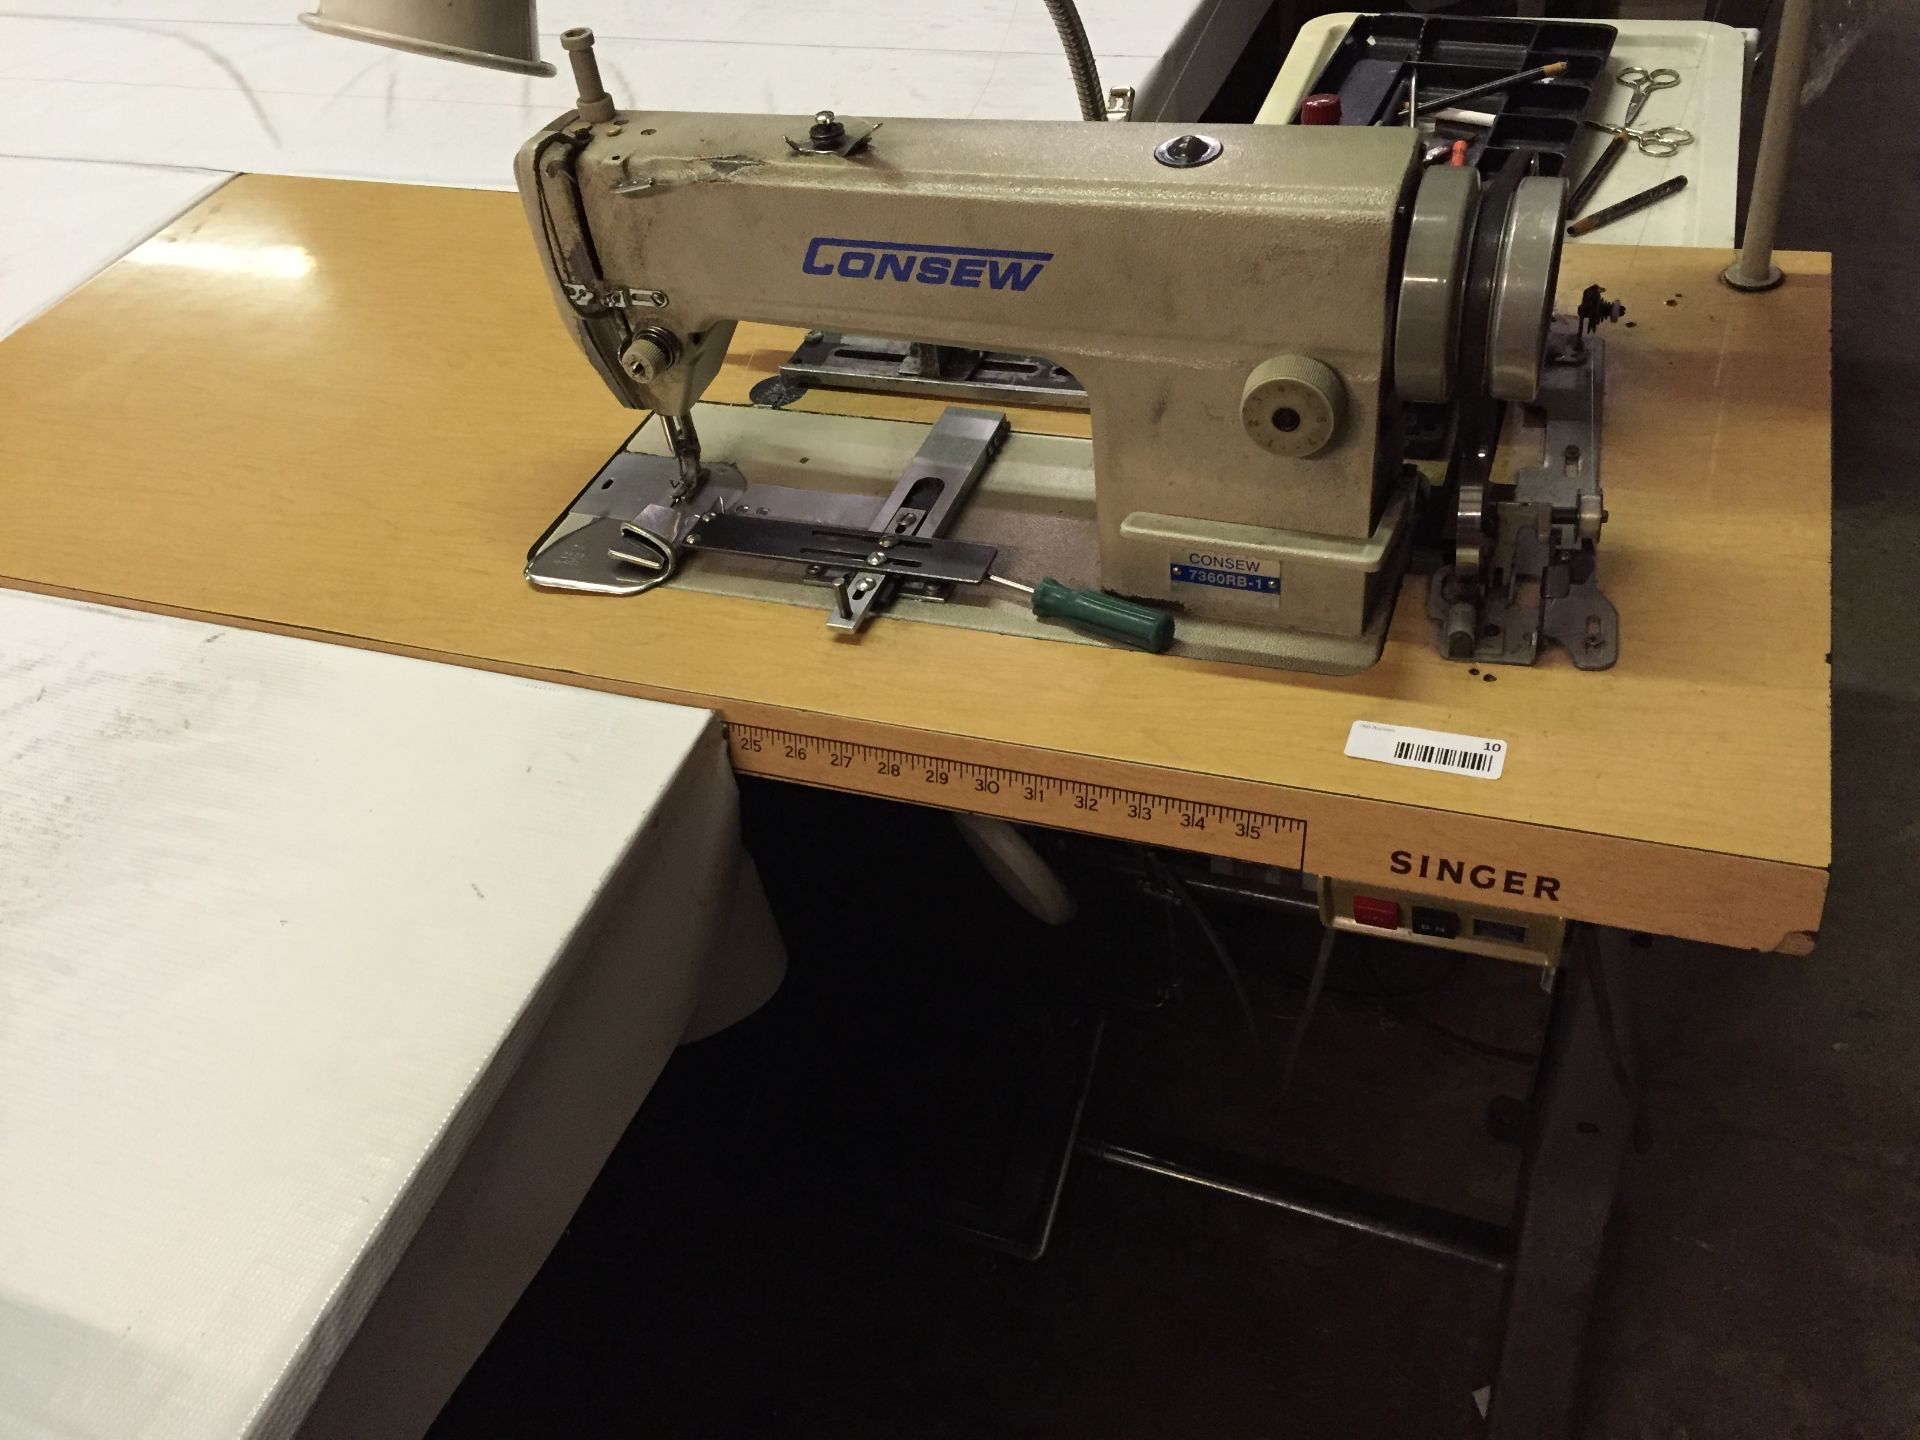 Consew Commercial Sewing Machine with Table, M/N 7360RB-1 - Image 2 of 7